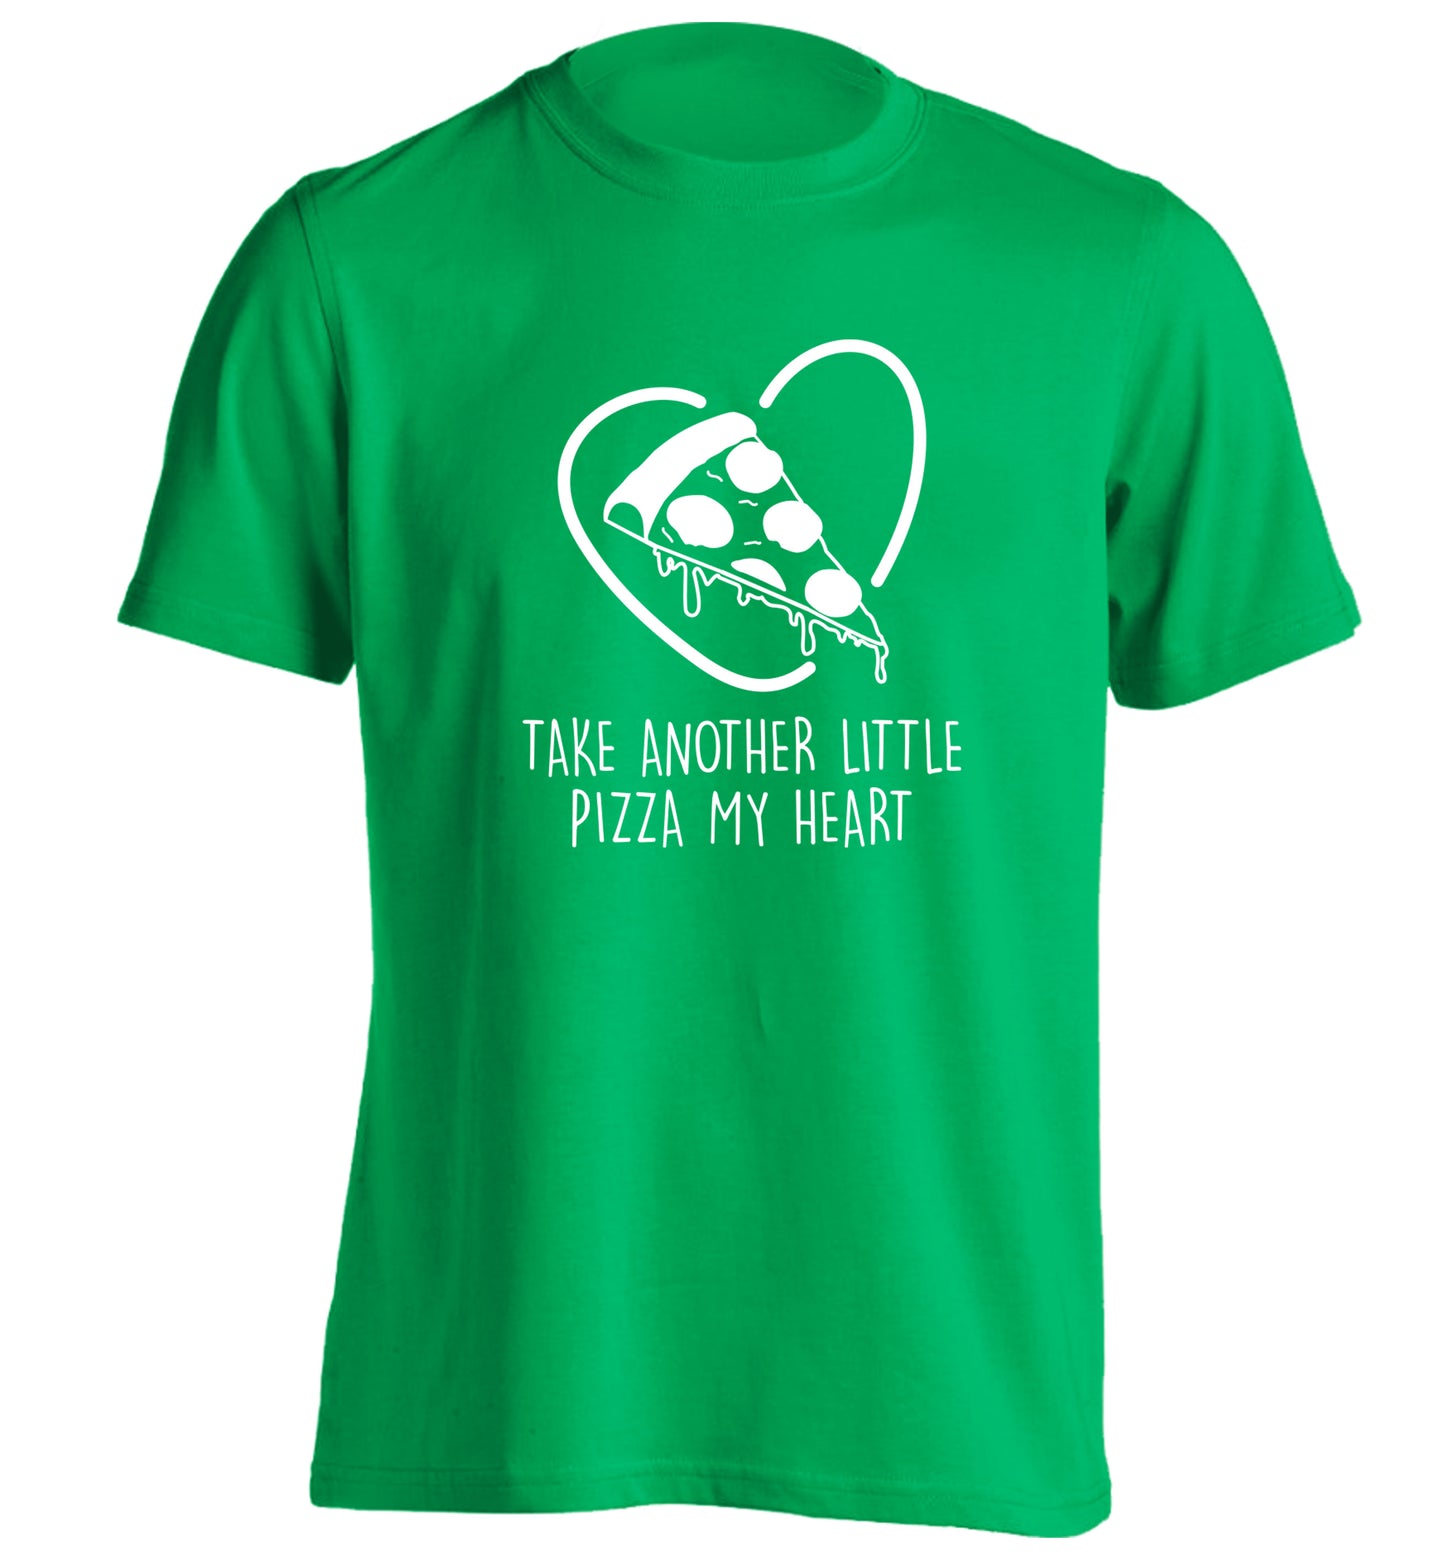 Take another little pizza my heart adults unisex green Tshirt 2XL